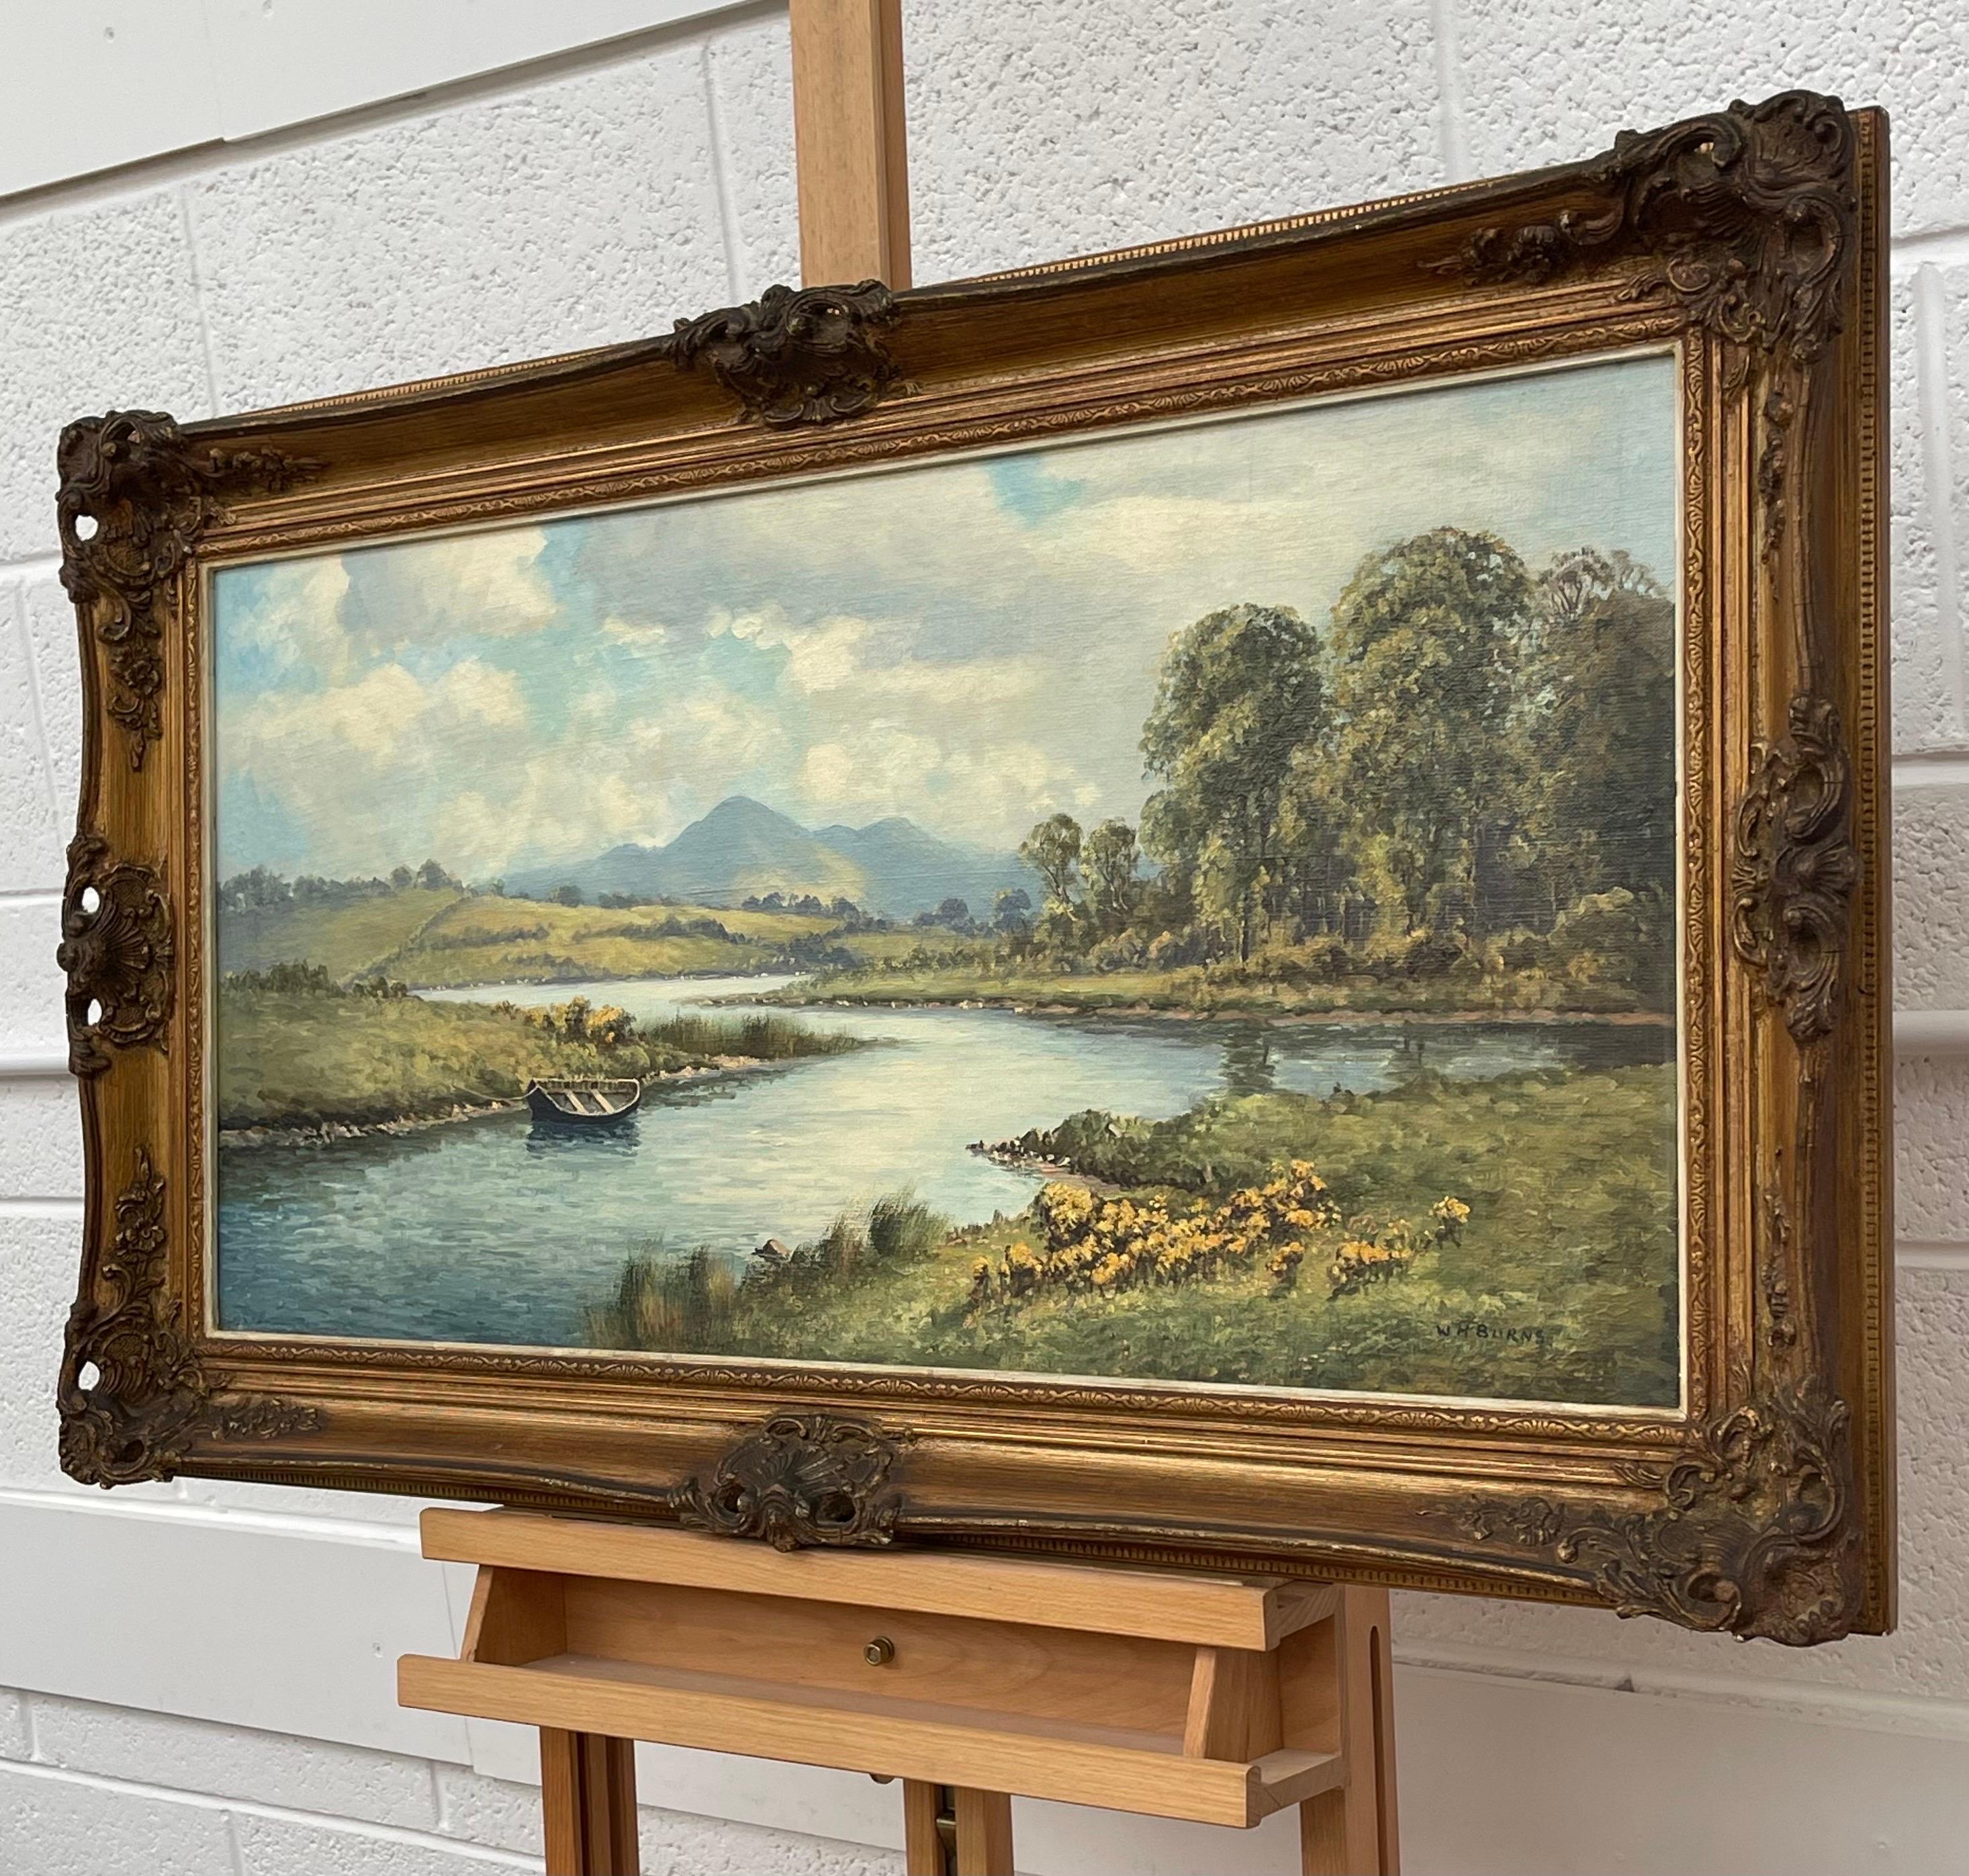 Original Oil Painting of Mountain River Scene in Ireland by Modern Irish Artist - Brown Landscape Painting by William Henry Burns